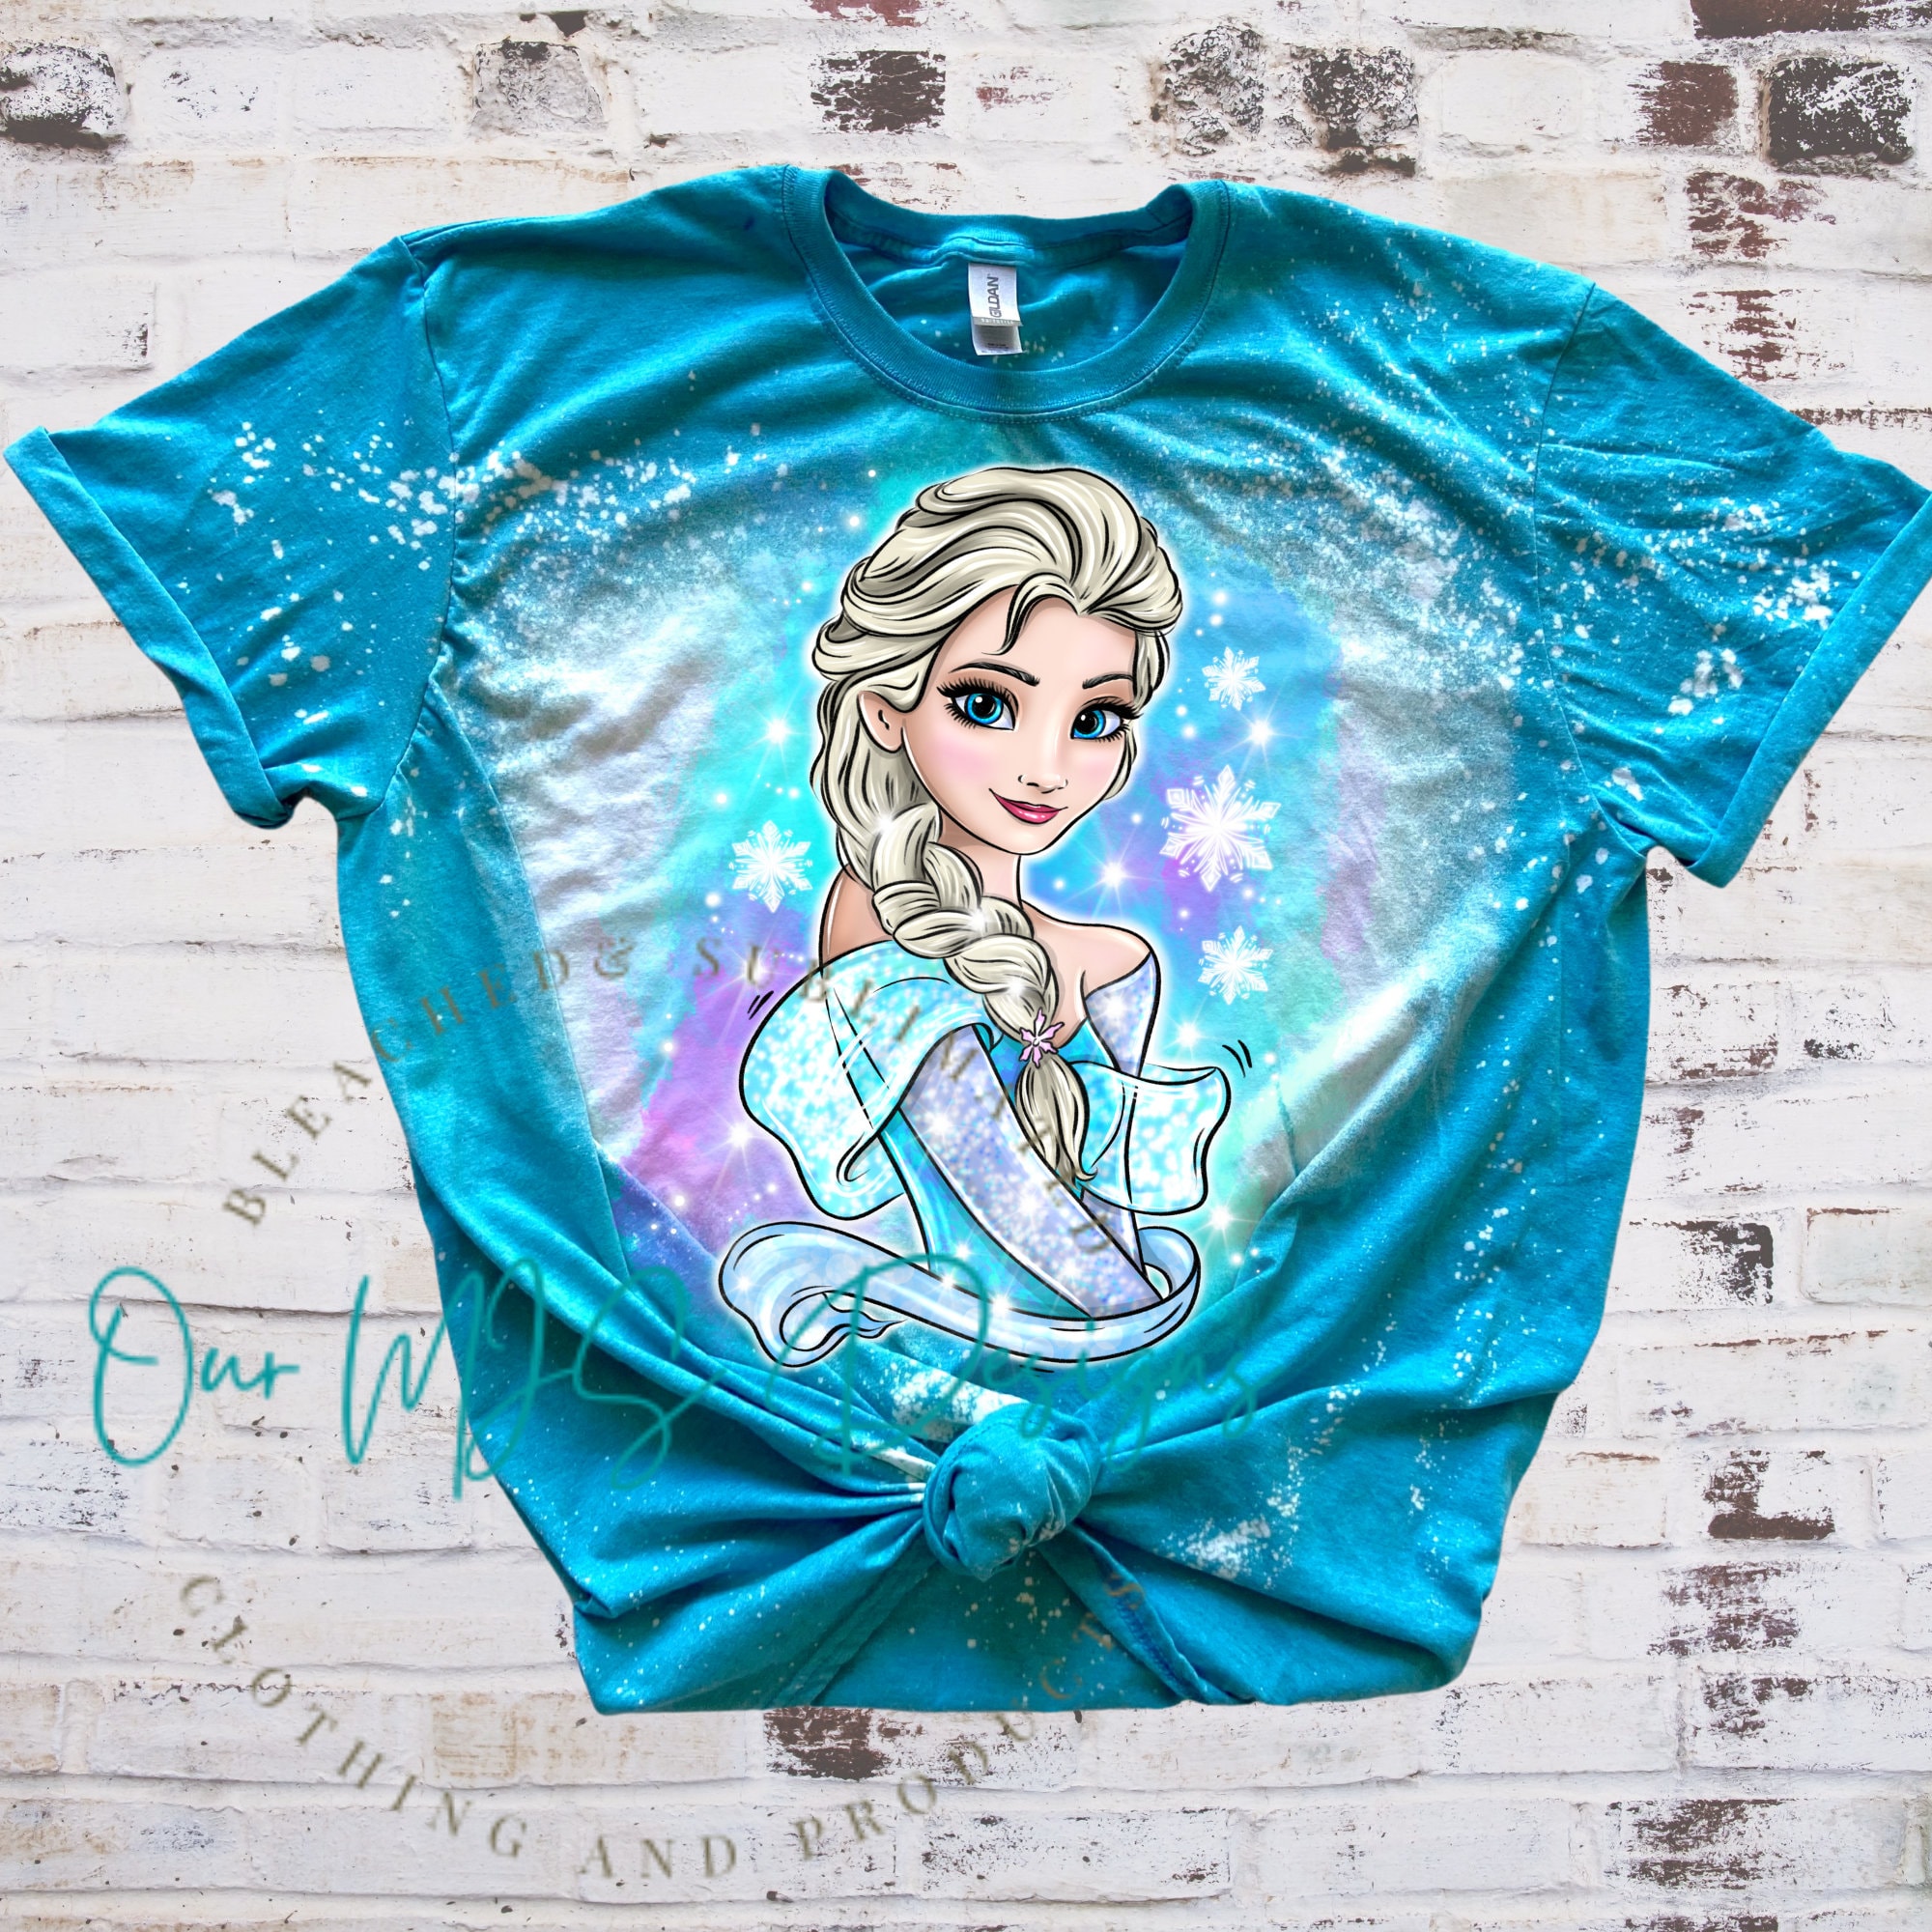 Princess Bleached Sublimated Tee Shirt -